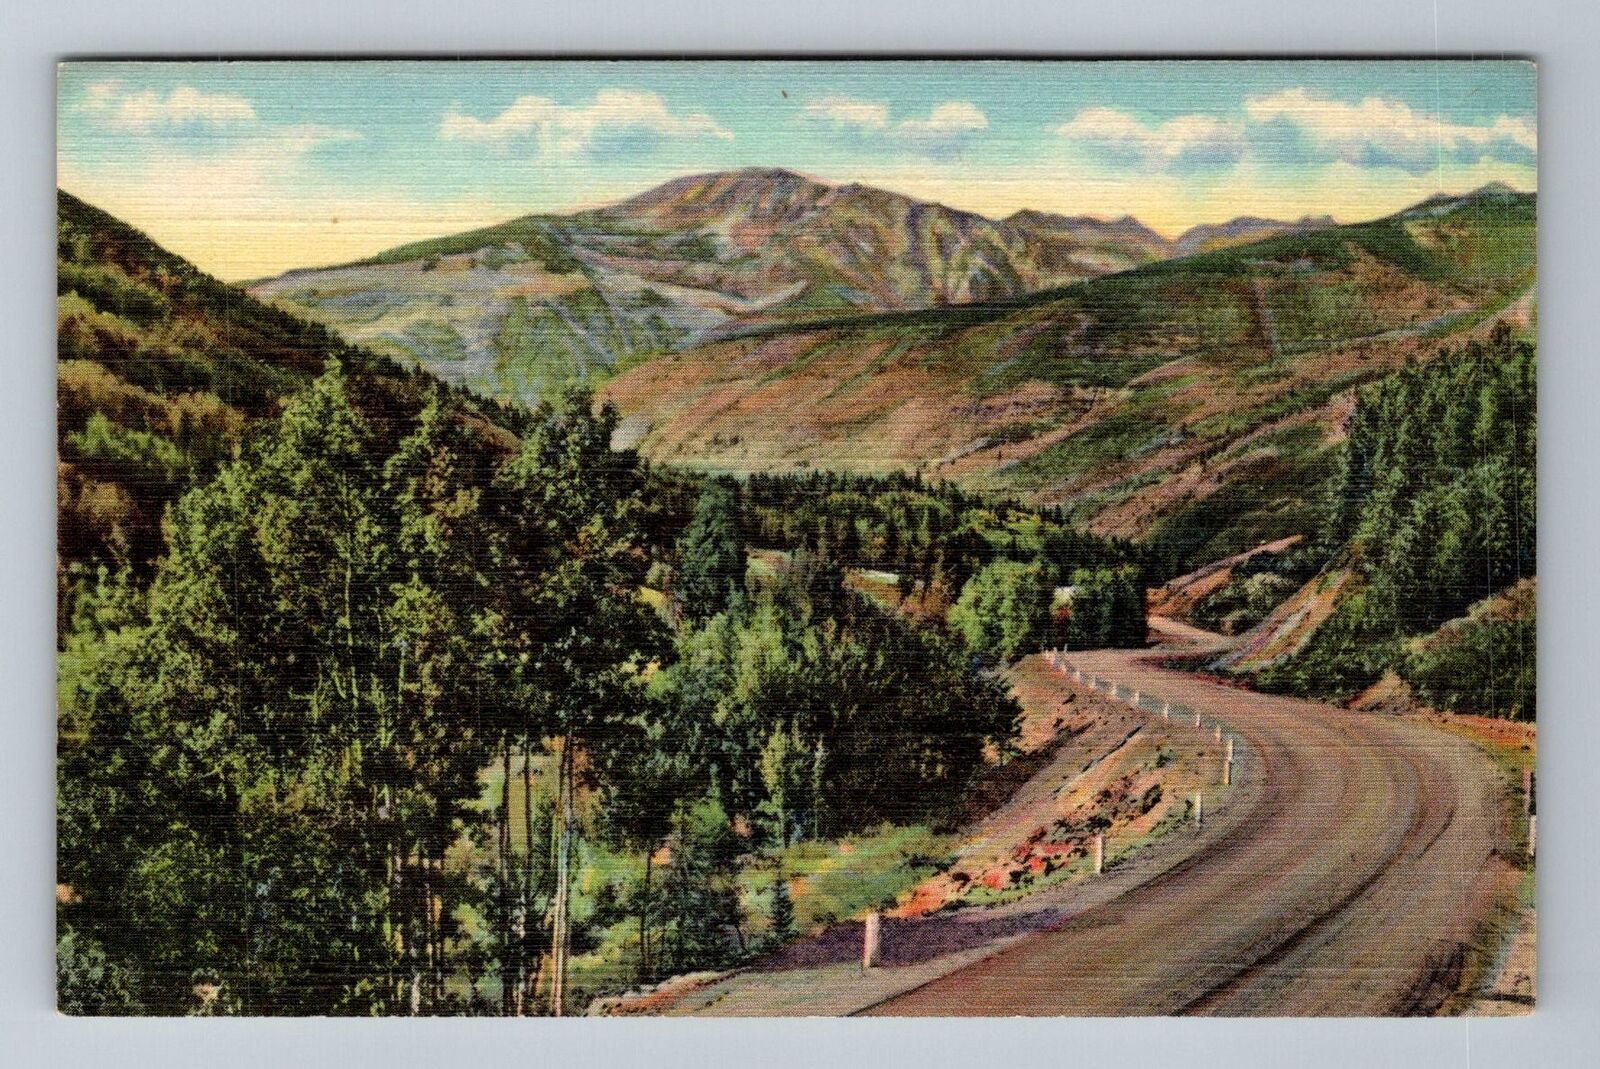 CO-Colorado Vail Pass Highway 6 Route To The Western Slope Vintage Postcard